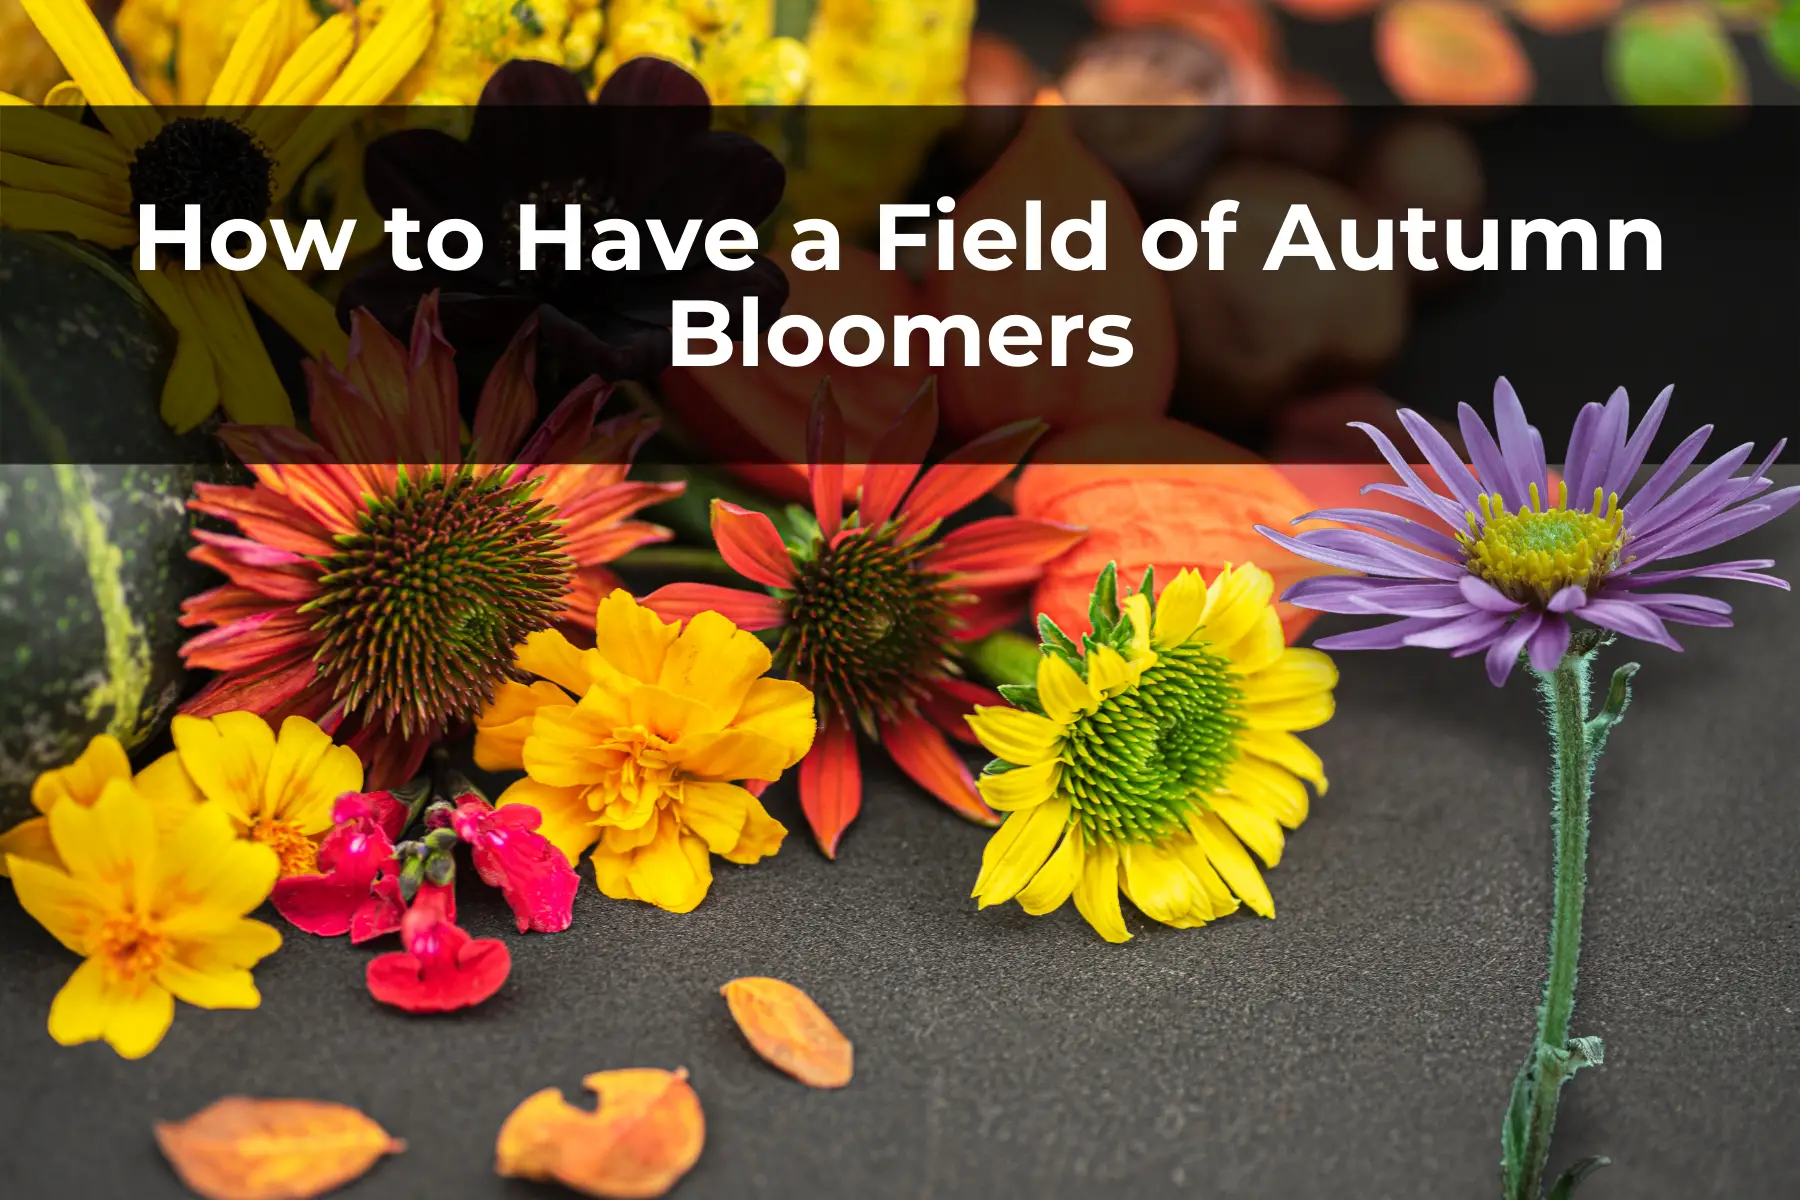 How to Have a Field of Autumn Bloomers